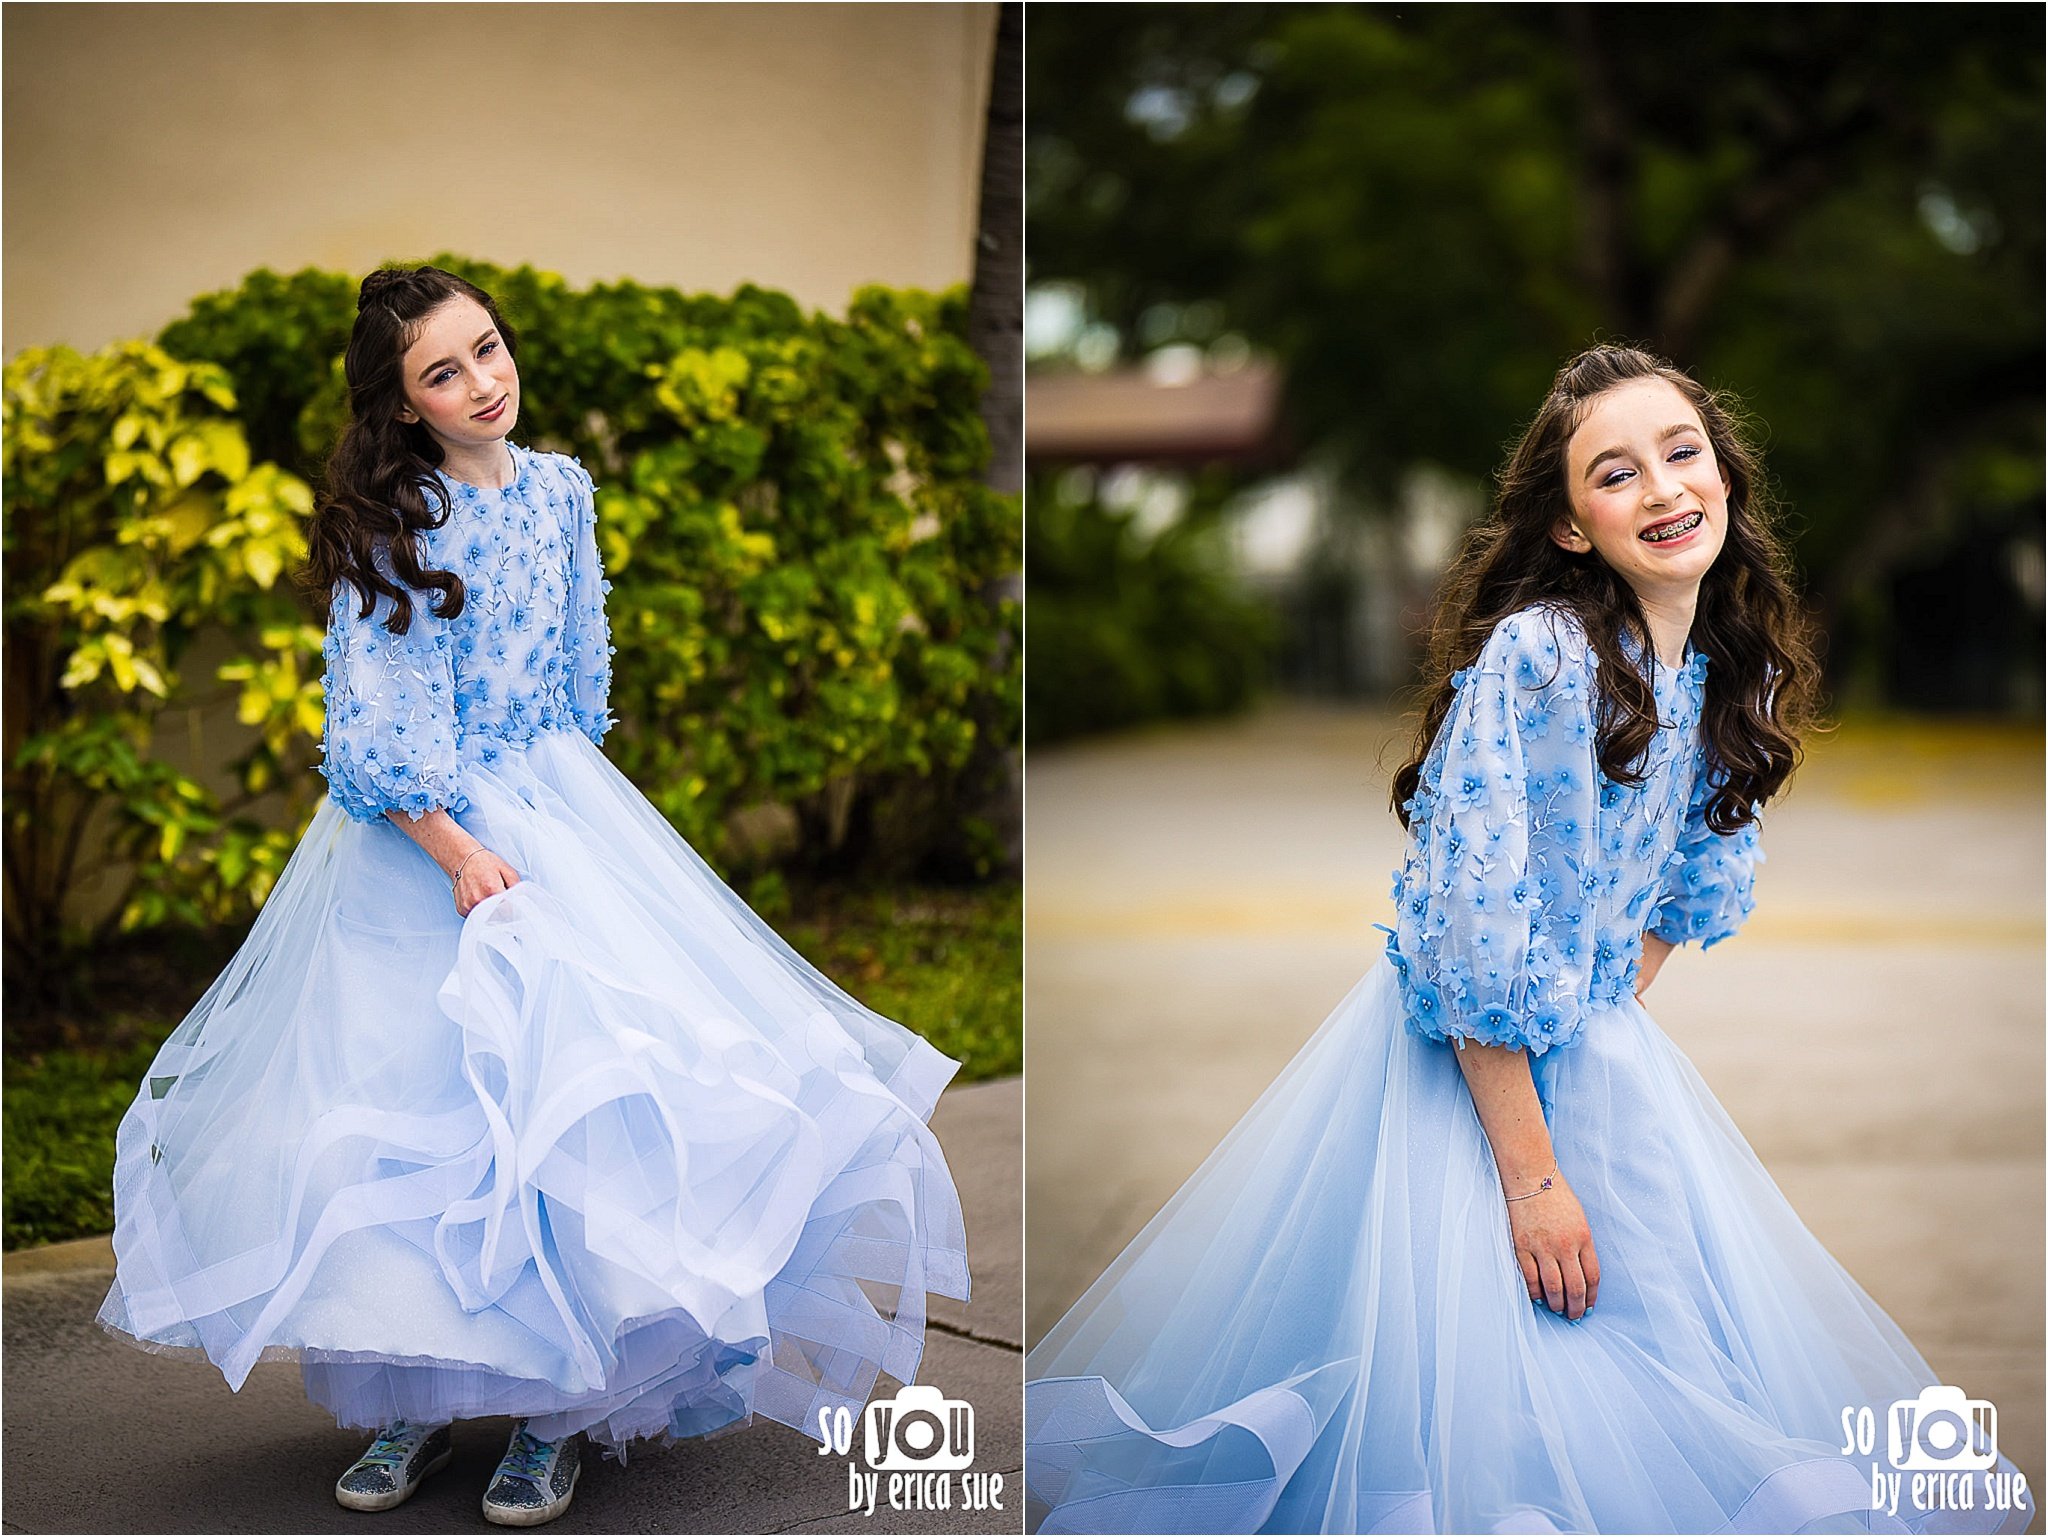 1-meira-bat-mitzvah-young-israel-hollywood-fl-photographer-so-you-by-erica-sueES1_9497 (2).jpg